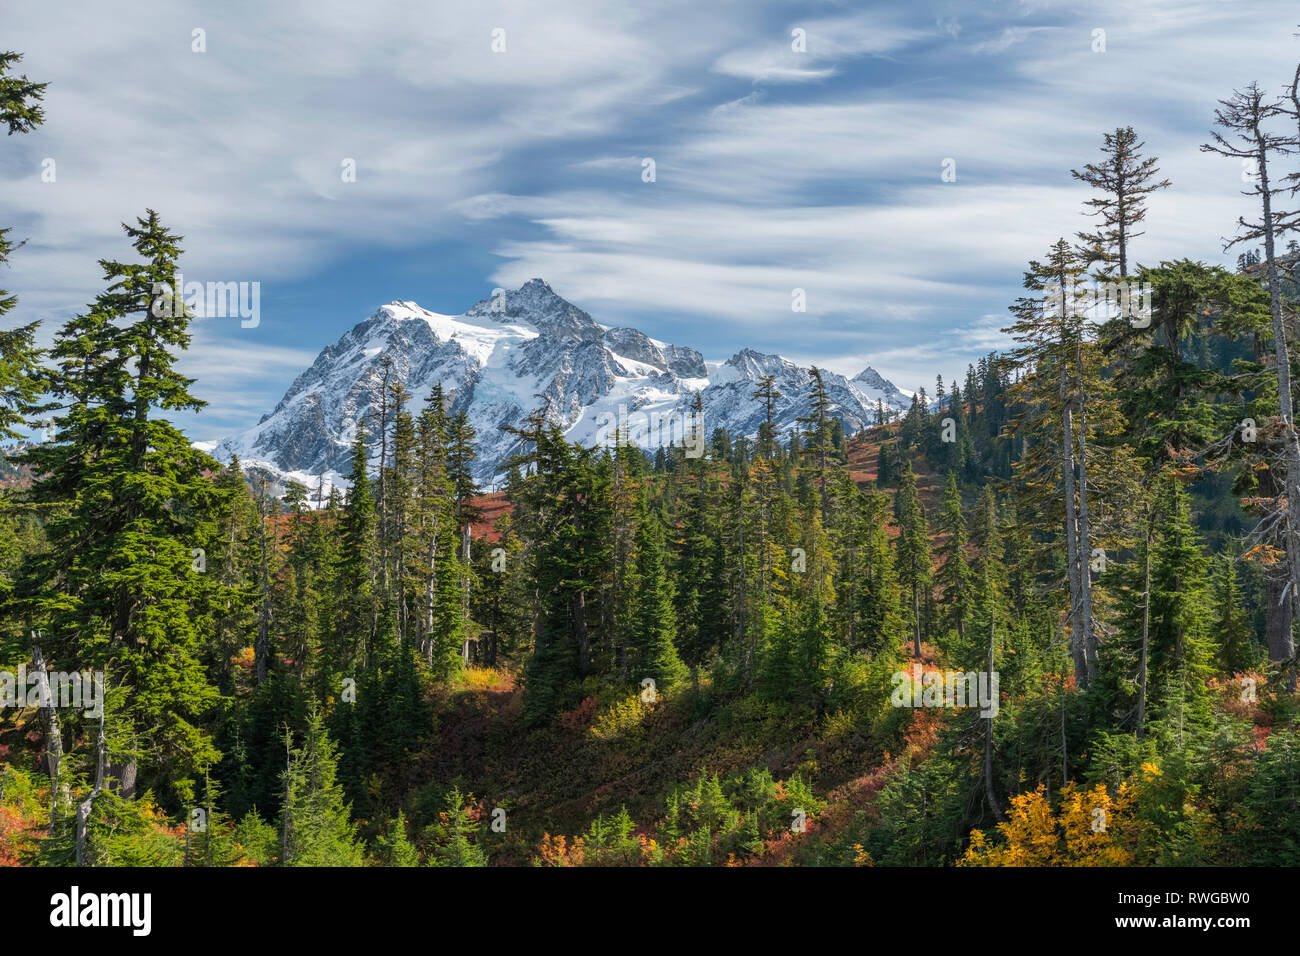 WASHINGTON - Mount Shuksan reflecting in Picture Lake in Heather Meadows Recreation Area in the North Cascades.Fall colours are abundant in the vegetation. Stock Photo